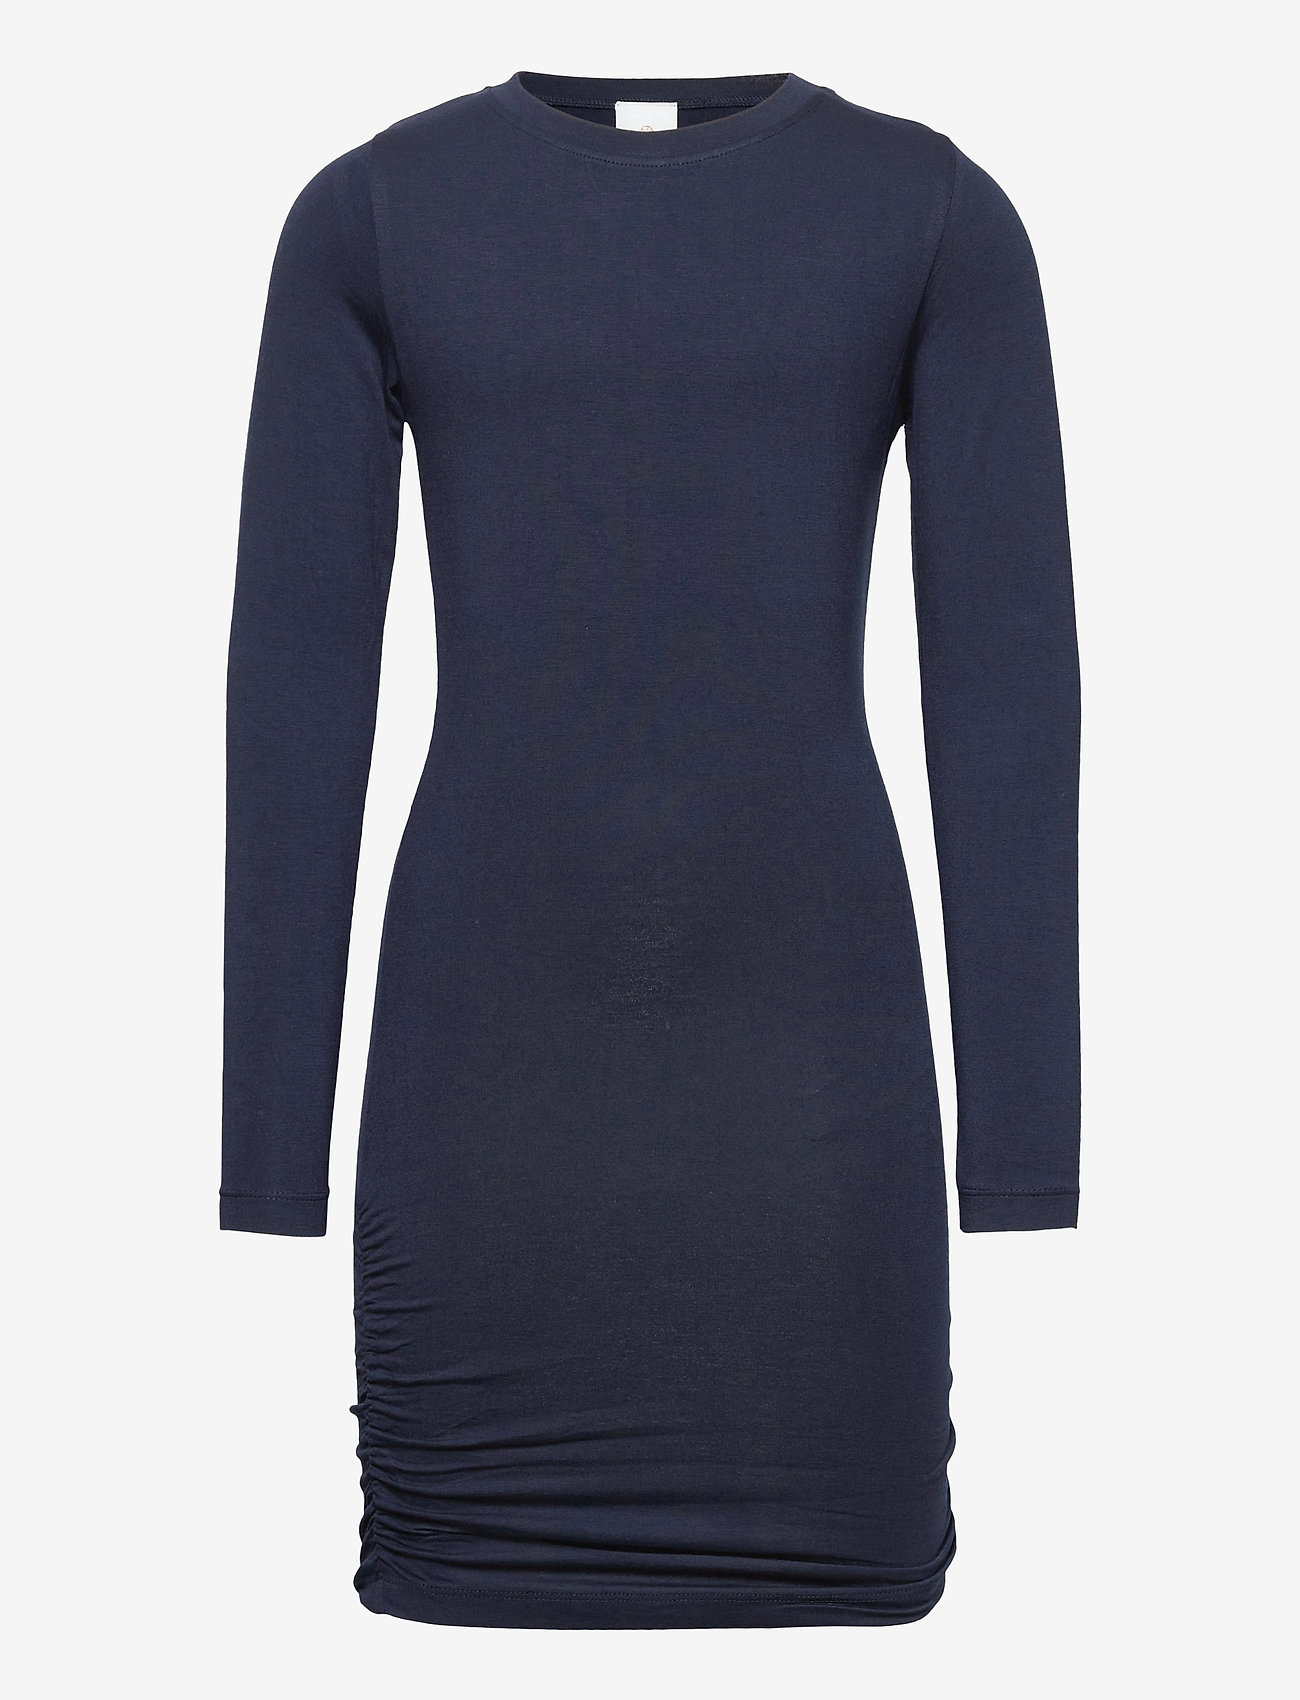 The New - BASIC L_S DRESS NOOS SUSTAINABLE - long-sleeved casual dresses - navy blazer - 0